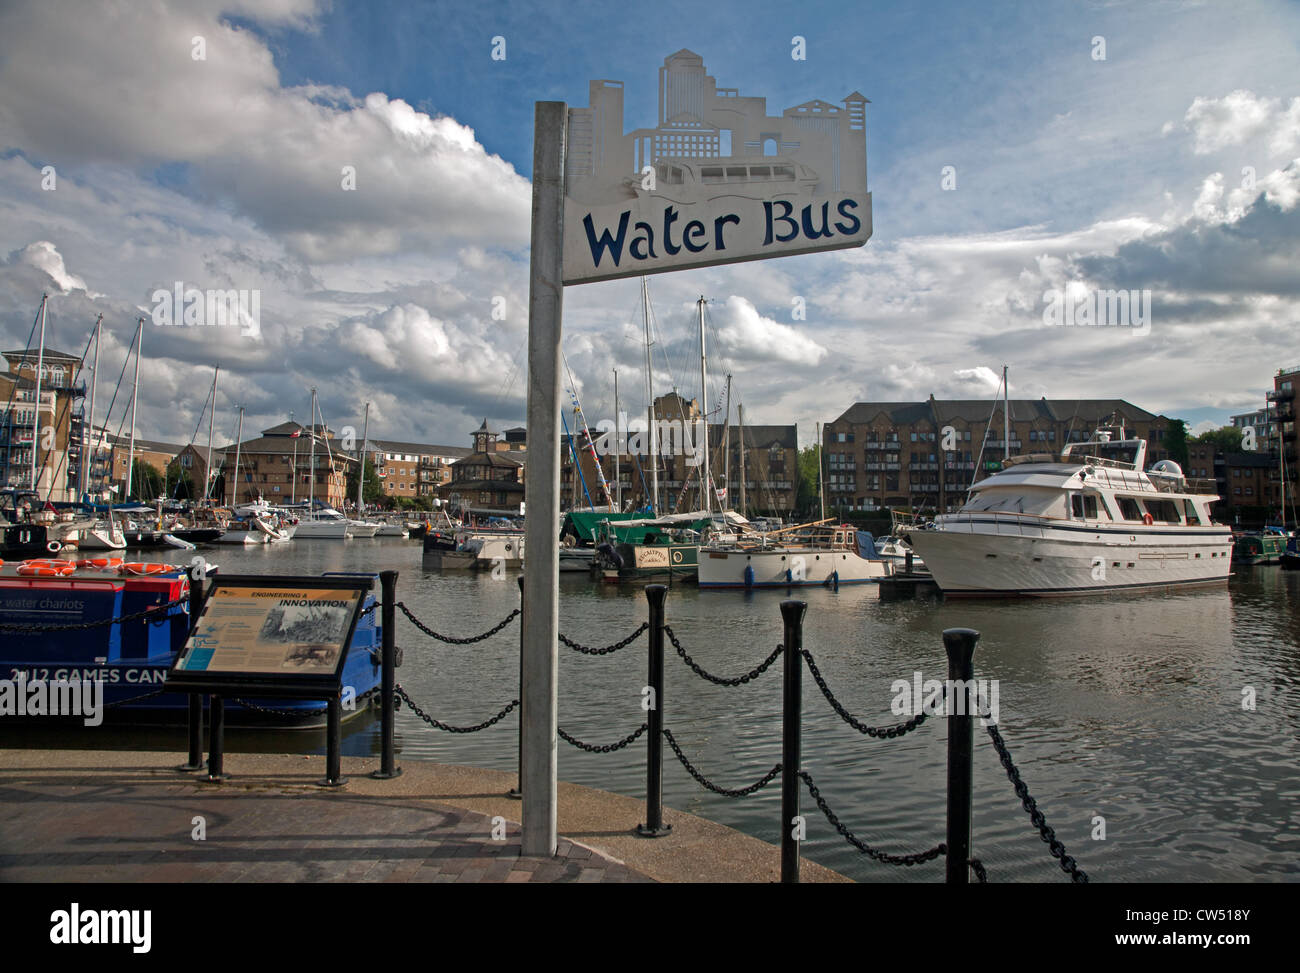 Water Bus sign in Limehouse Marina which connects the River Lee (via the Limehouse Cut), the Regents Canal and the River Thames. Stock Photo